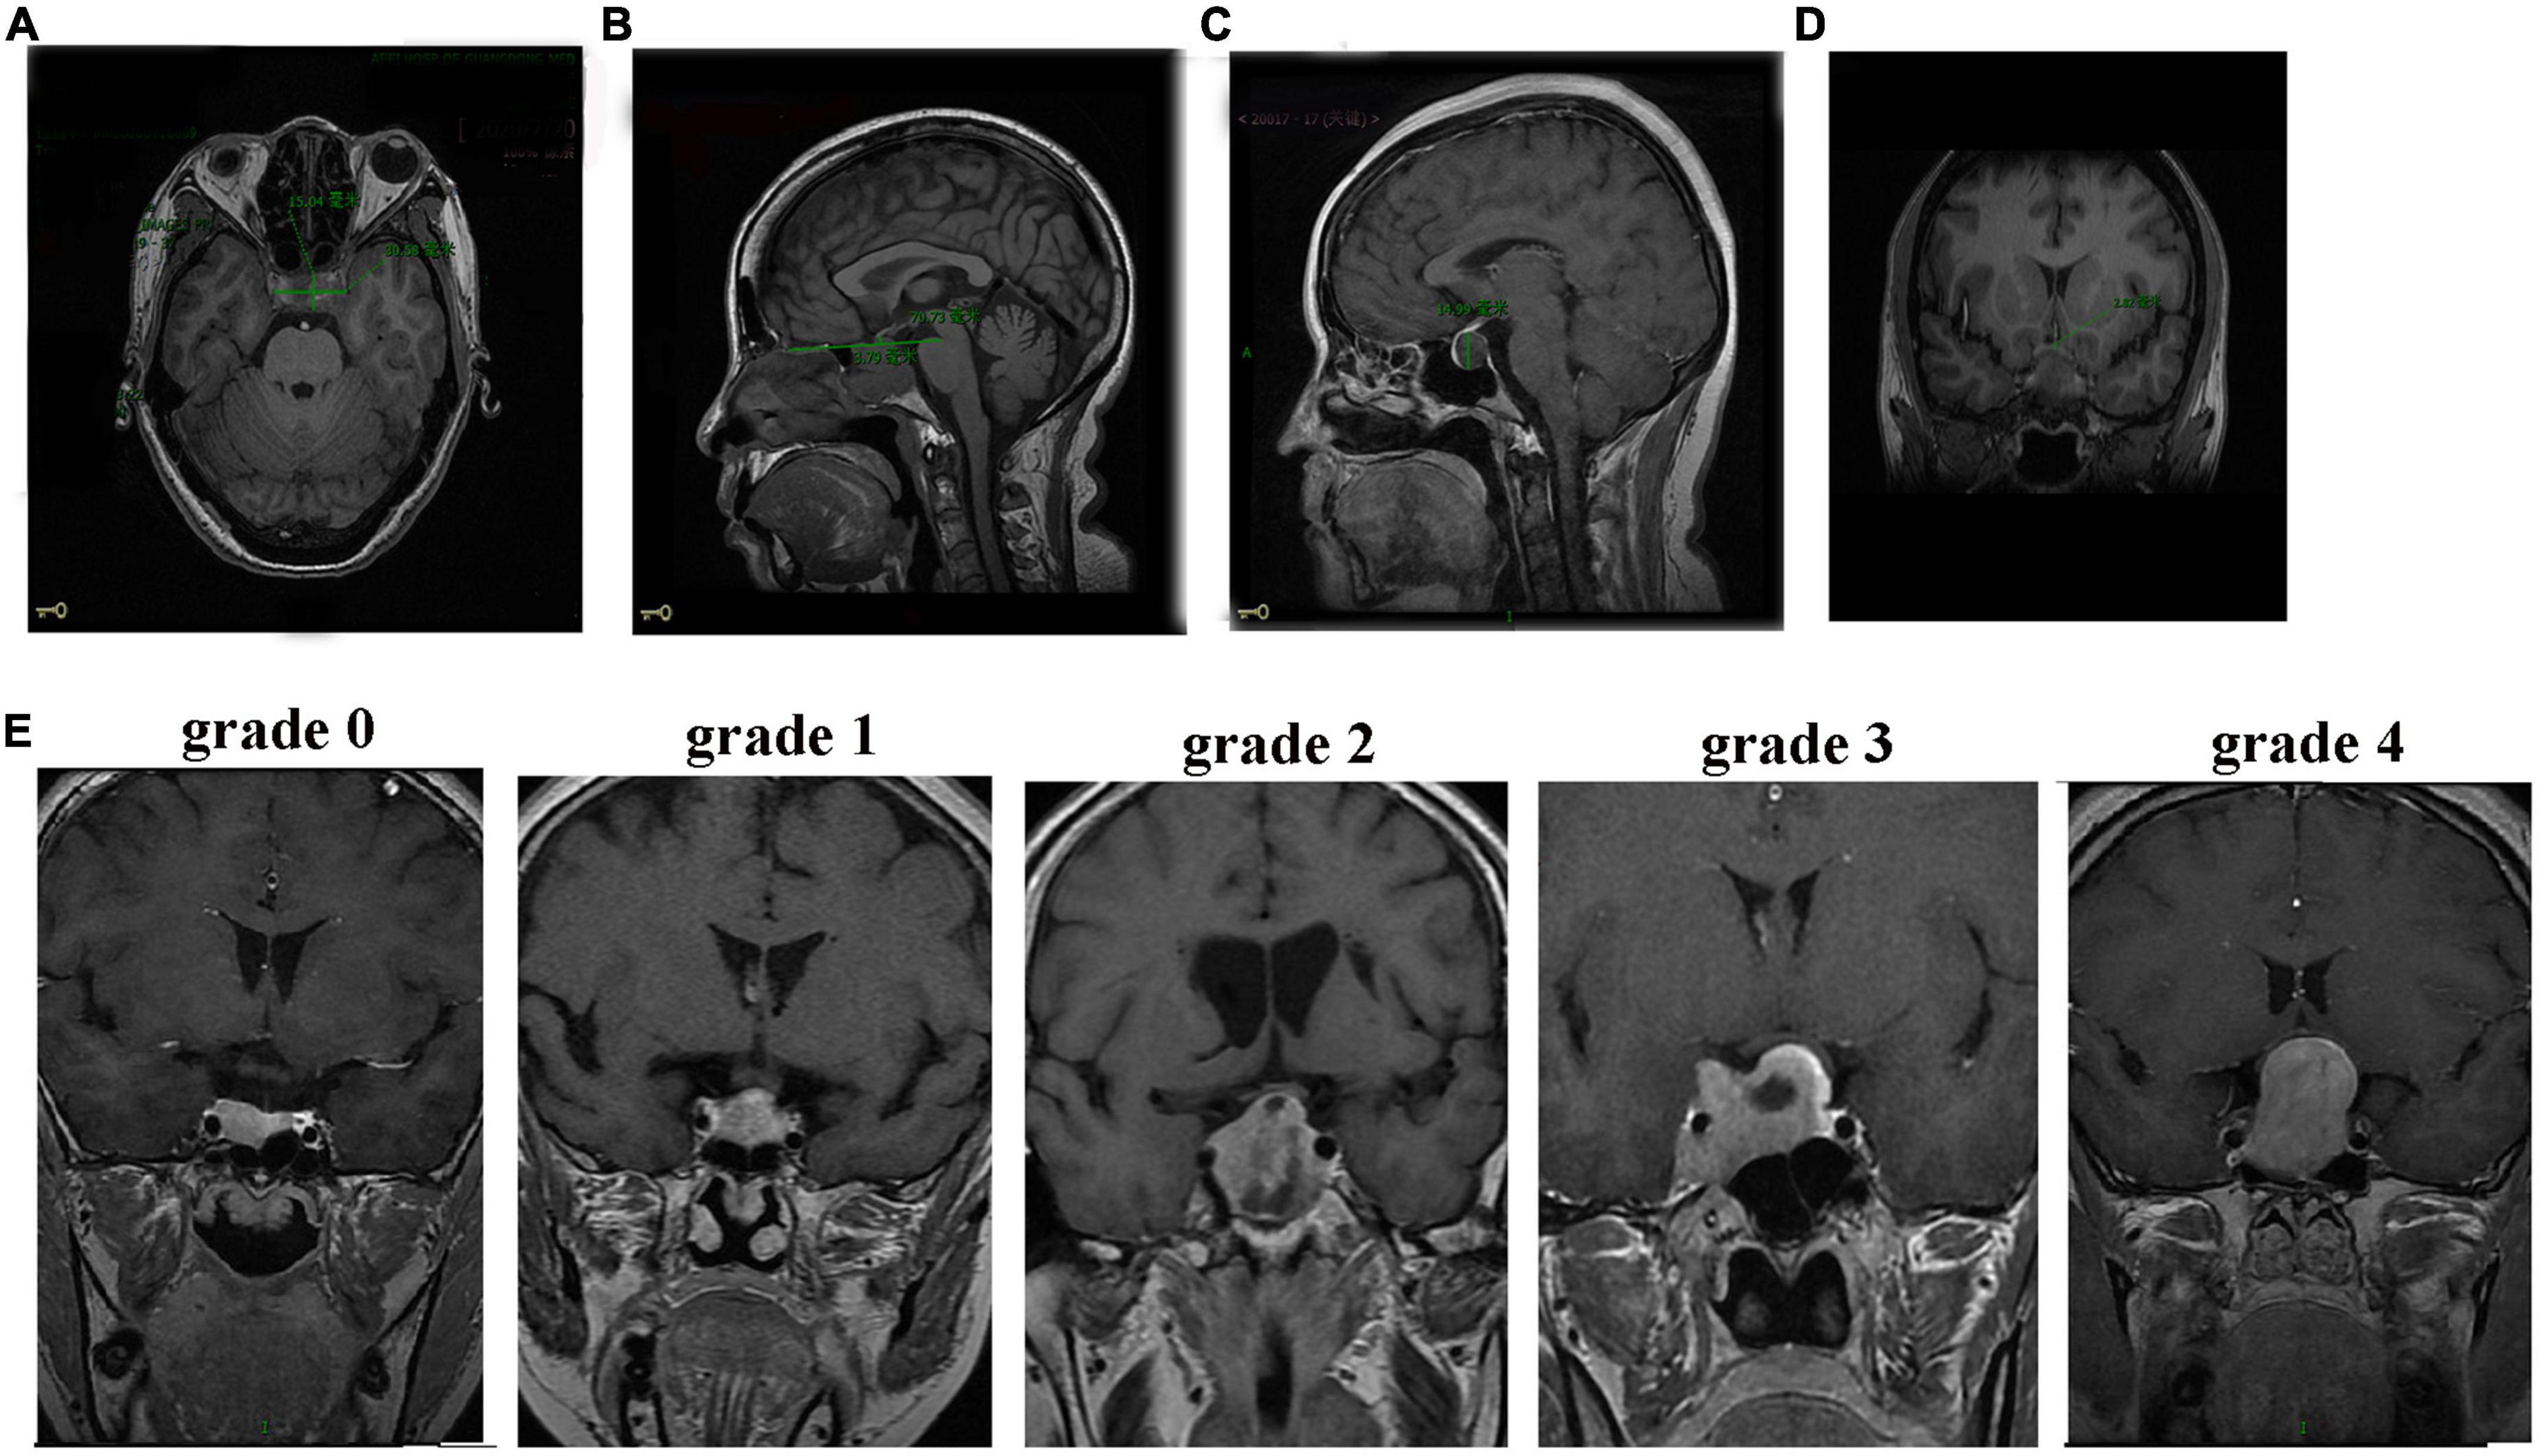 Evaluation of preoperative visual pathway impairment in patients with non-functioning pituitary adenoma using diffusion tensor imaging coupled with optical coherence tomography